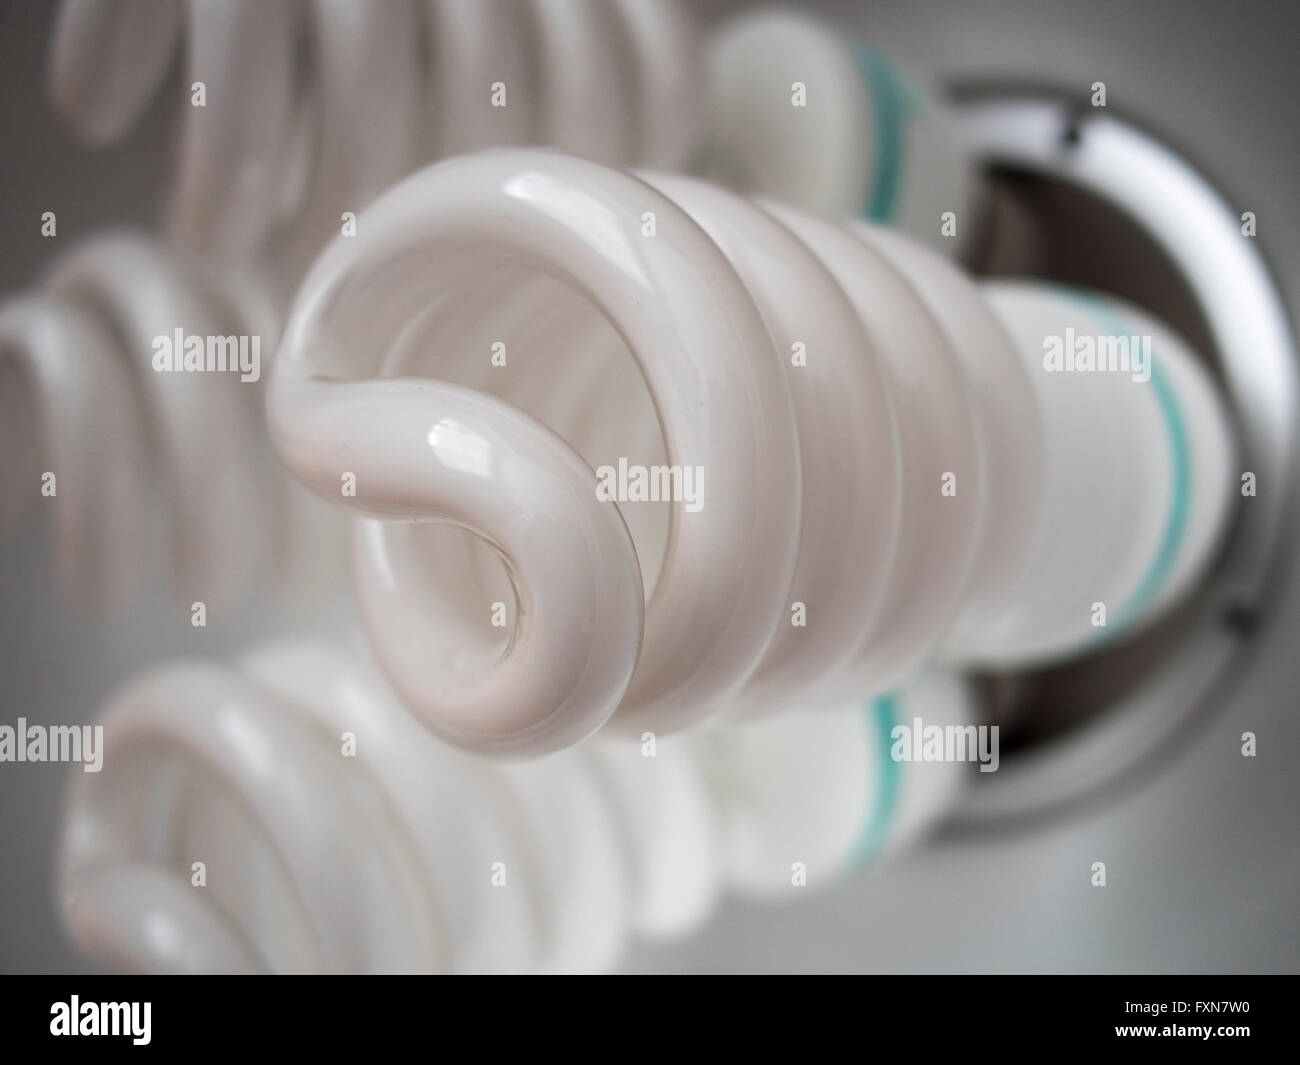 Four large eco-friendly low-energy spiral lighbulbs. Stock Photo